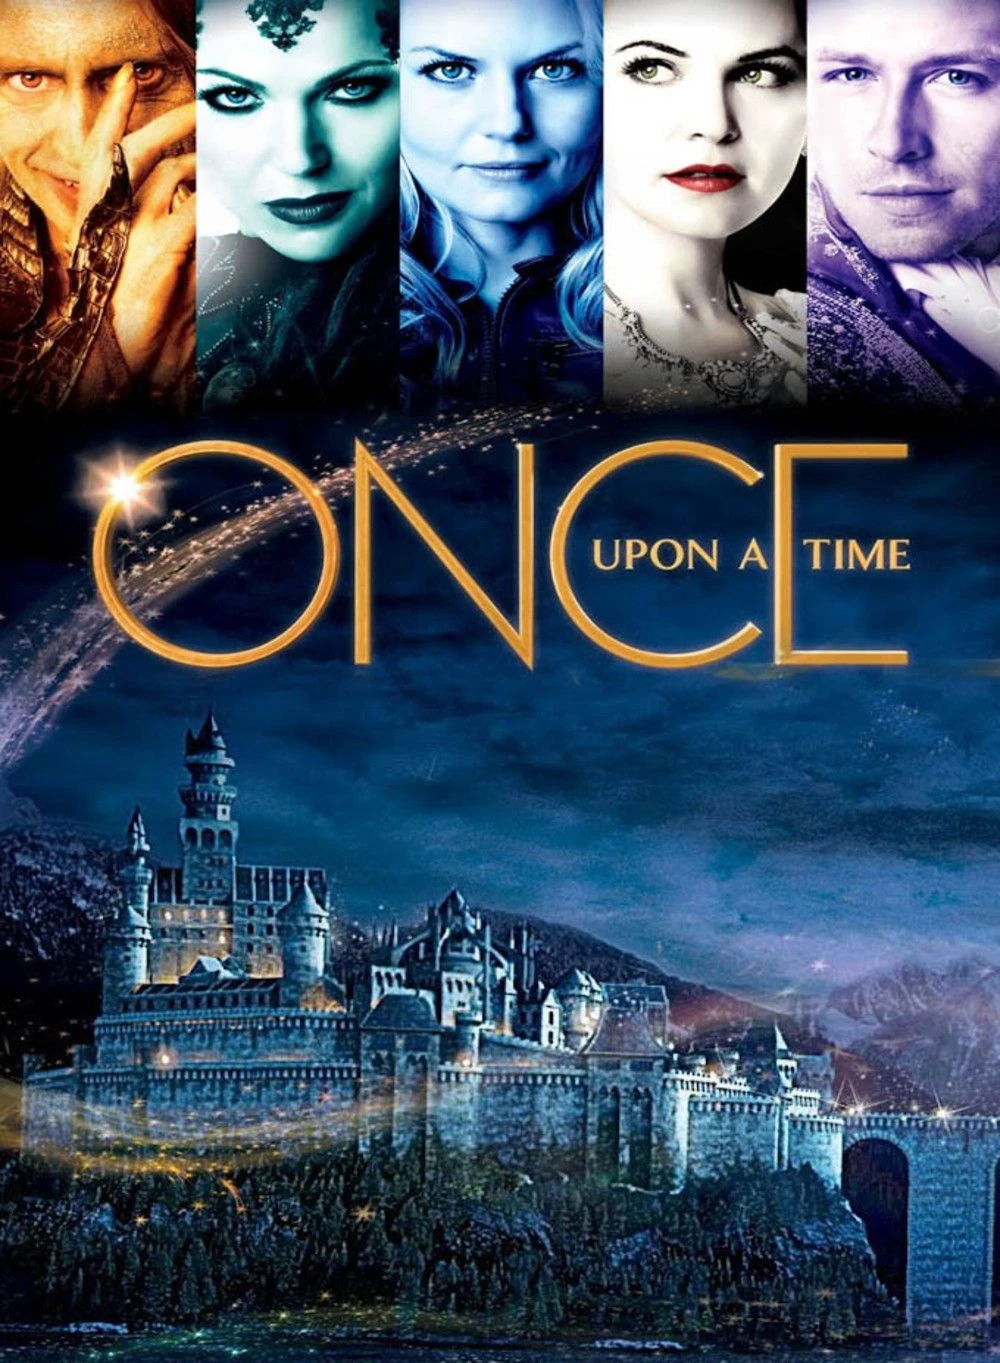 Once Upon a Time (Integrale) MULTI 1080p HDTV